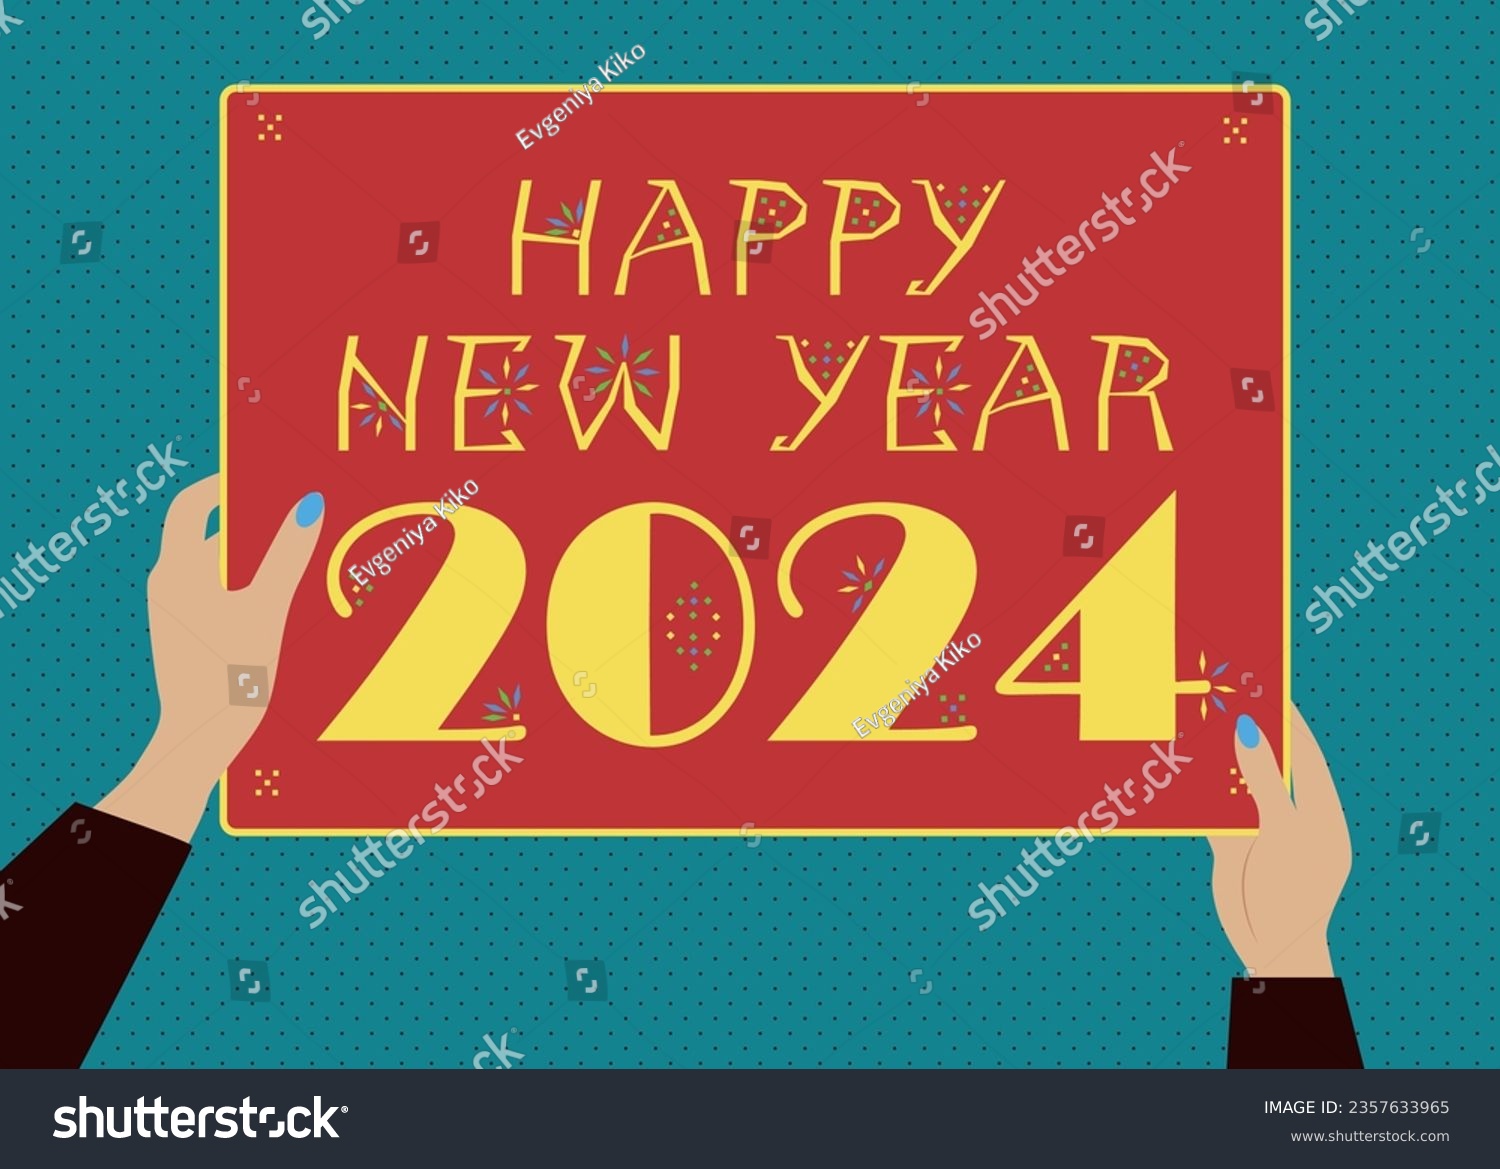 SVG of 60s Retro New Year Greeting - Vibrant Happy New Year 2024 card. Two hands, complete with blue manicured nails, clutching a vivid poster. Yellow signs adorned with geometric decorations, red background svg